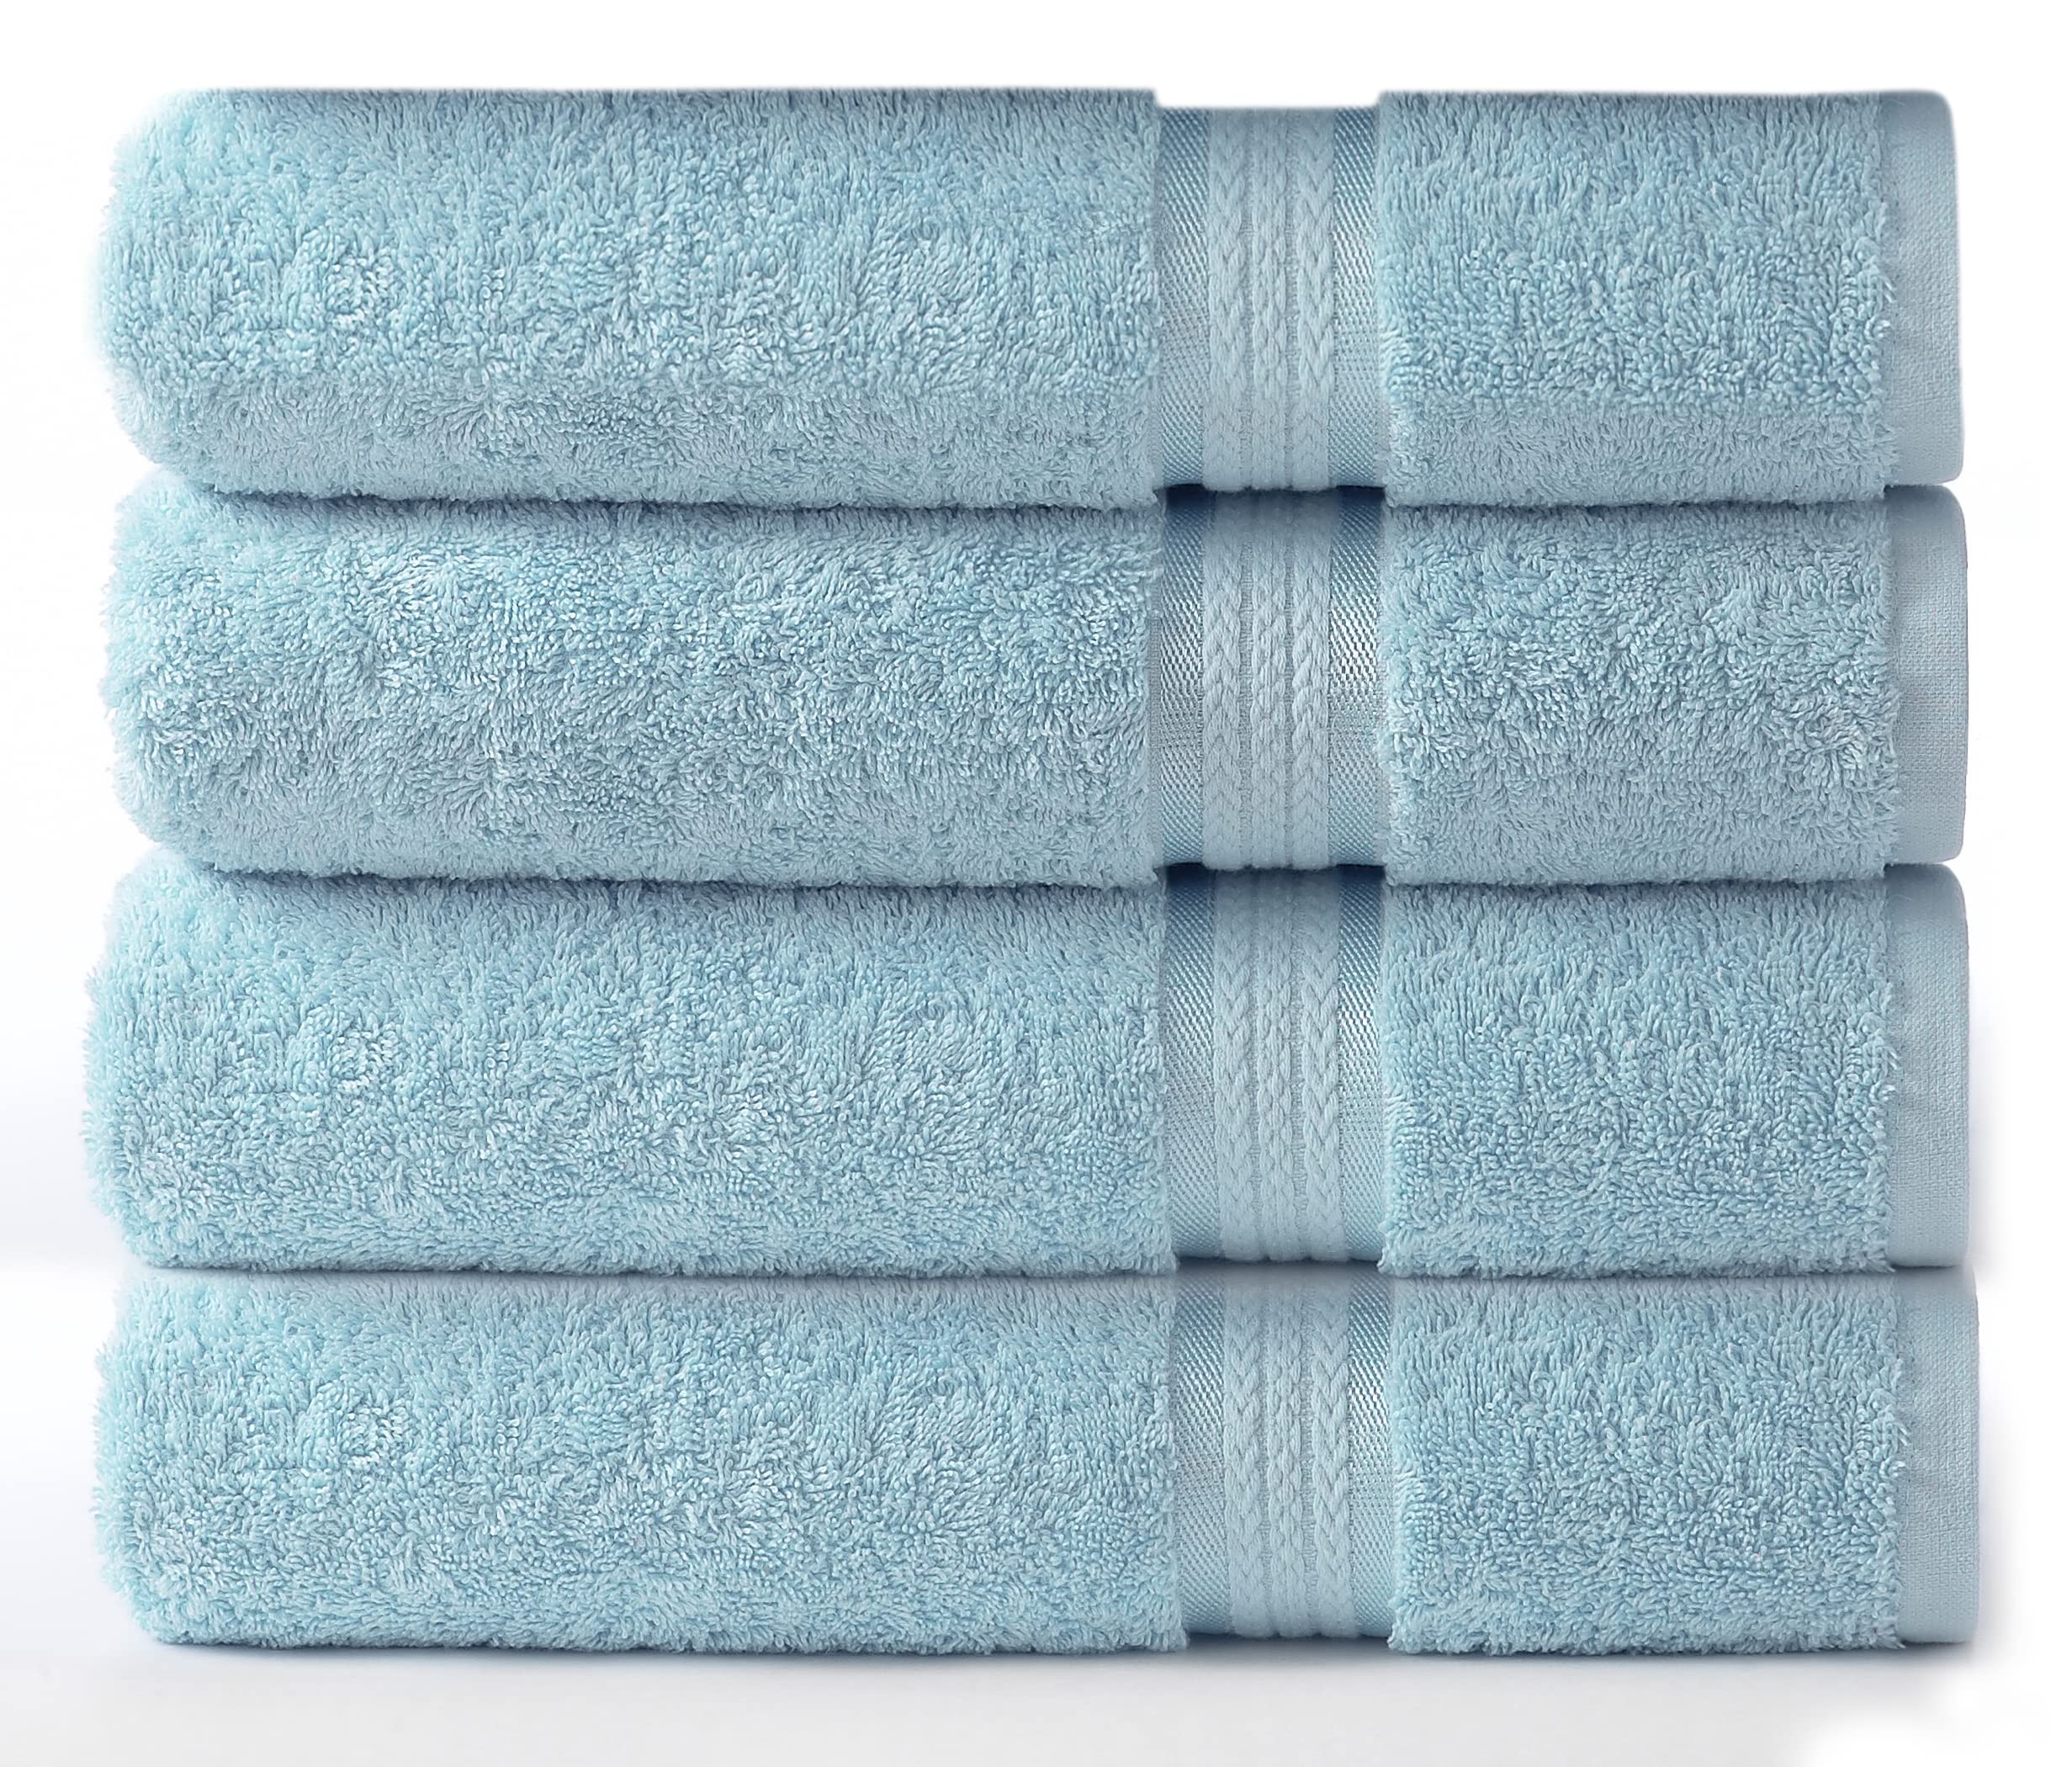 Book Cover COTTON CRAFT Ultra Soft Oversized Bath Towels - 4 Pack Extra Large Bath Towels - 30x54 - Absorbent Everyday Luxury Hotel Spa Gym Shower Beach Pool Camp Travel Dorm -100% Cotton- Easy Care - Light Blue 4 Pack Bath Towels Light Blue